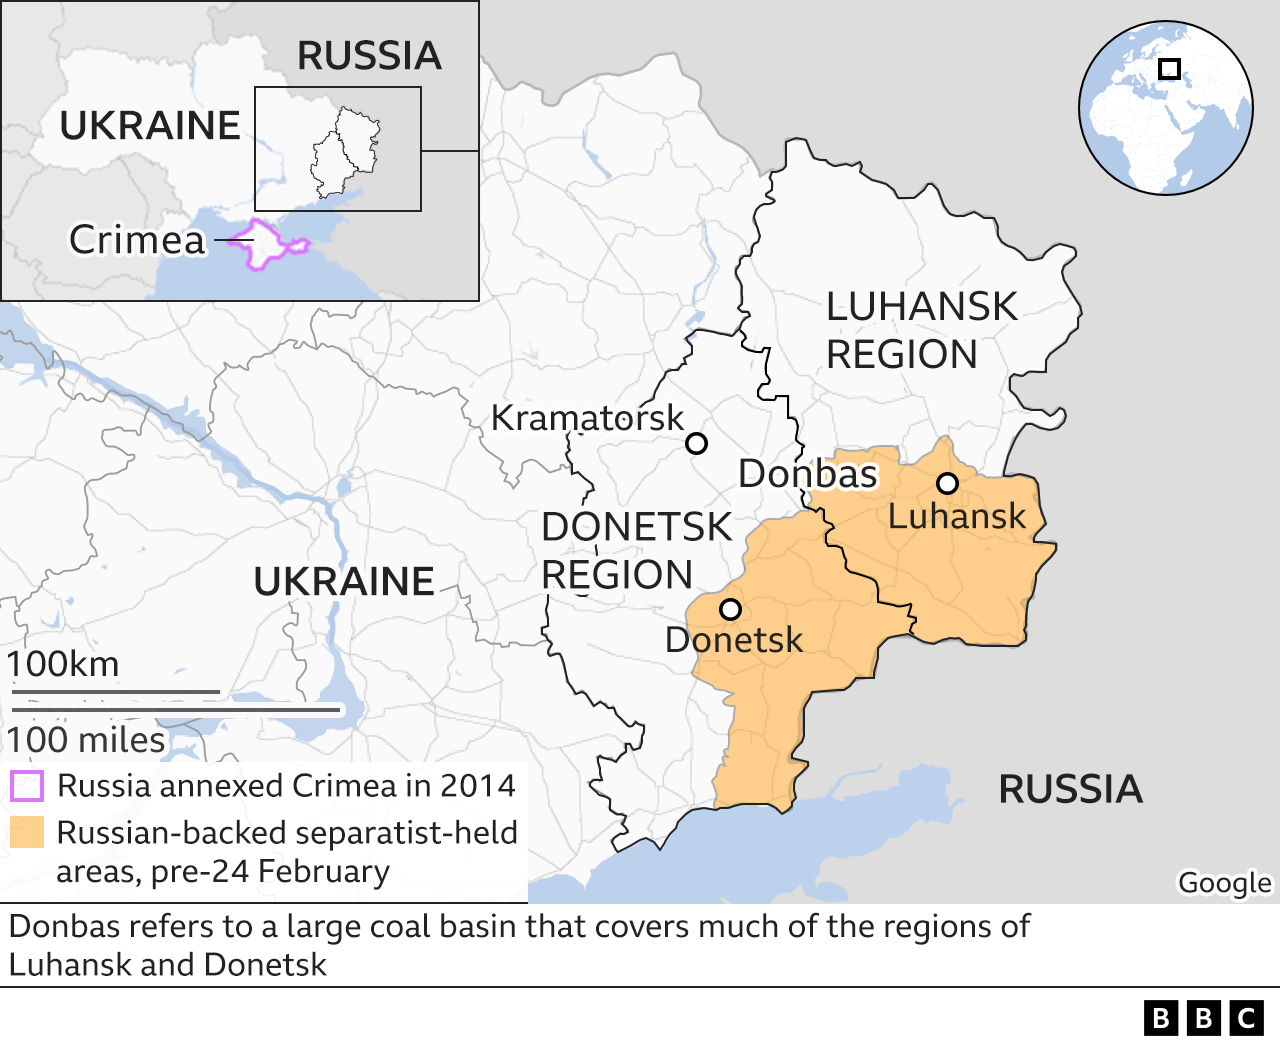 Map shows the eastern Donbas region of Ukraine and the location of the city of Kramatorsk